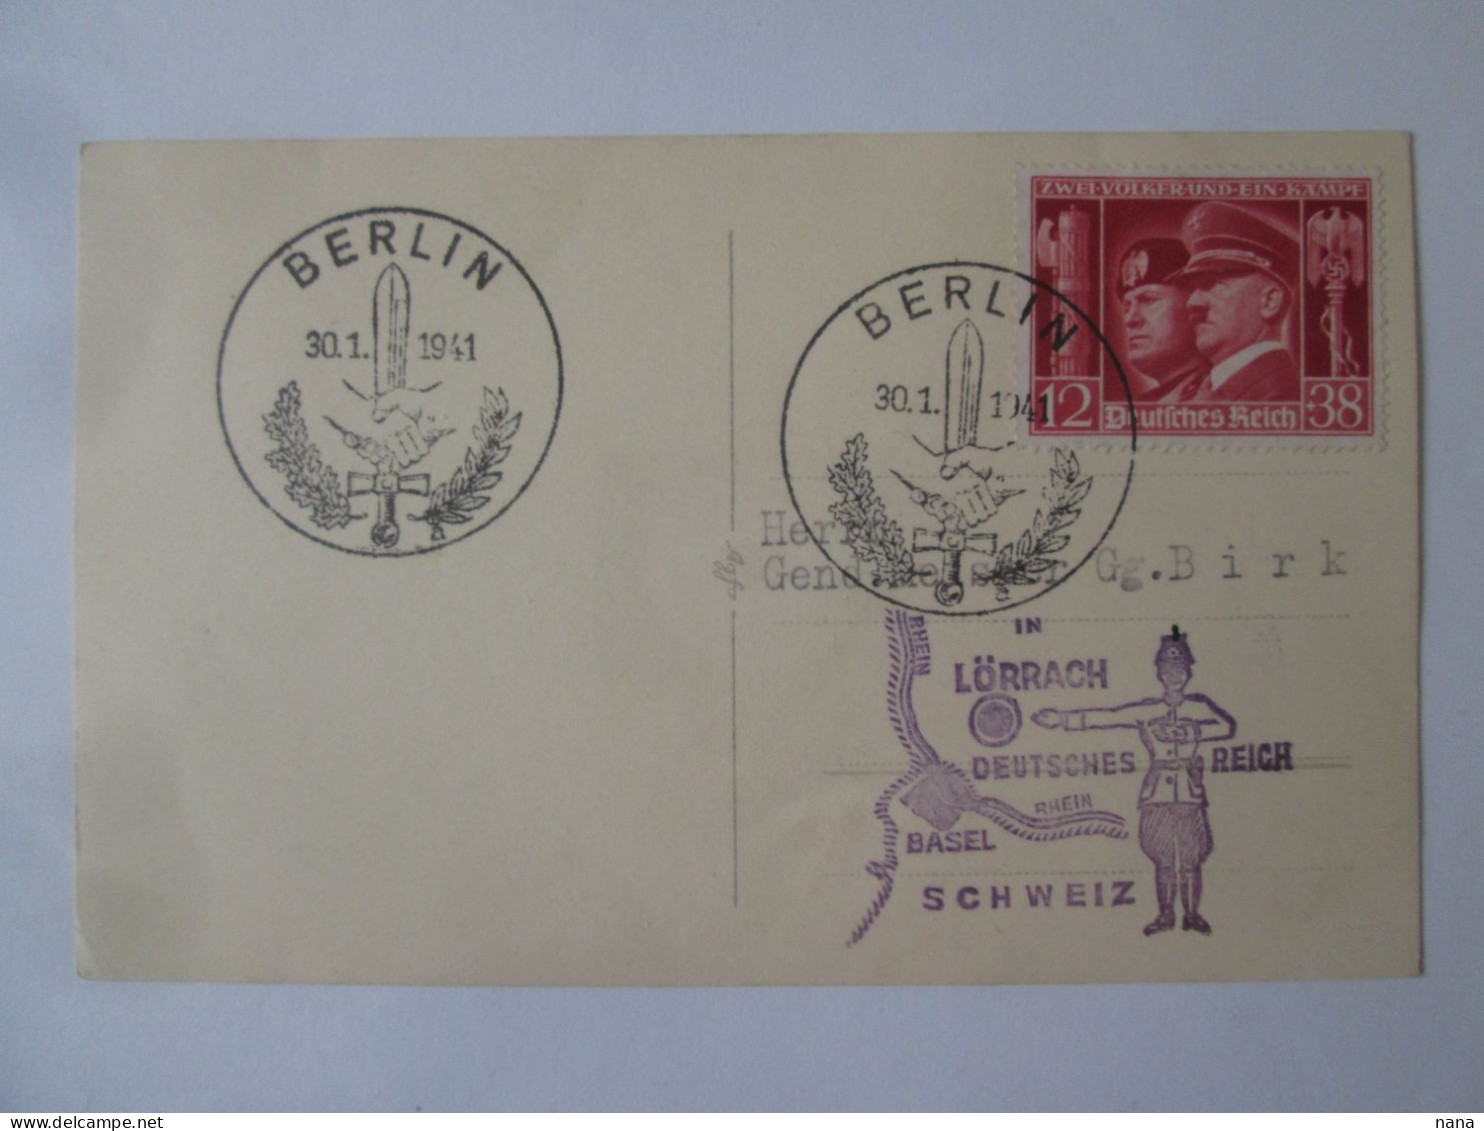 Allemagne Expos.philatelique Berlin,carte Photo 1941/Germany Philatelic Exhib.Berlin 1941 Photo Rare Stamps - War And Propaganda Forgeries